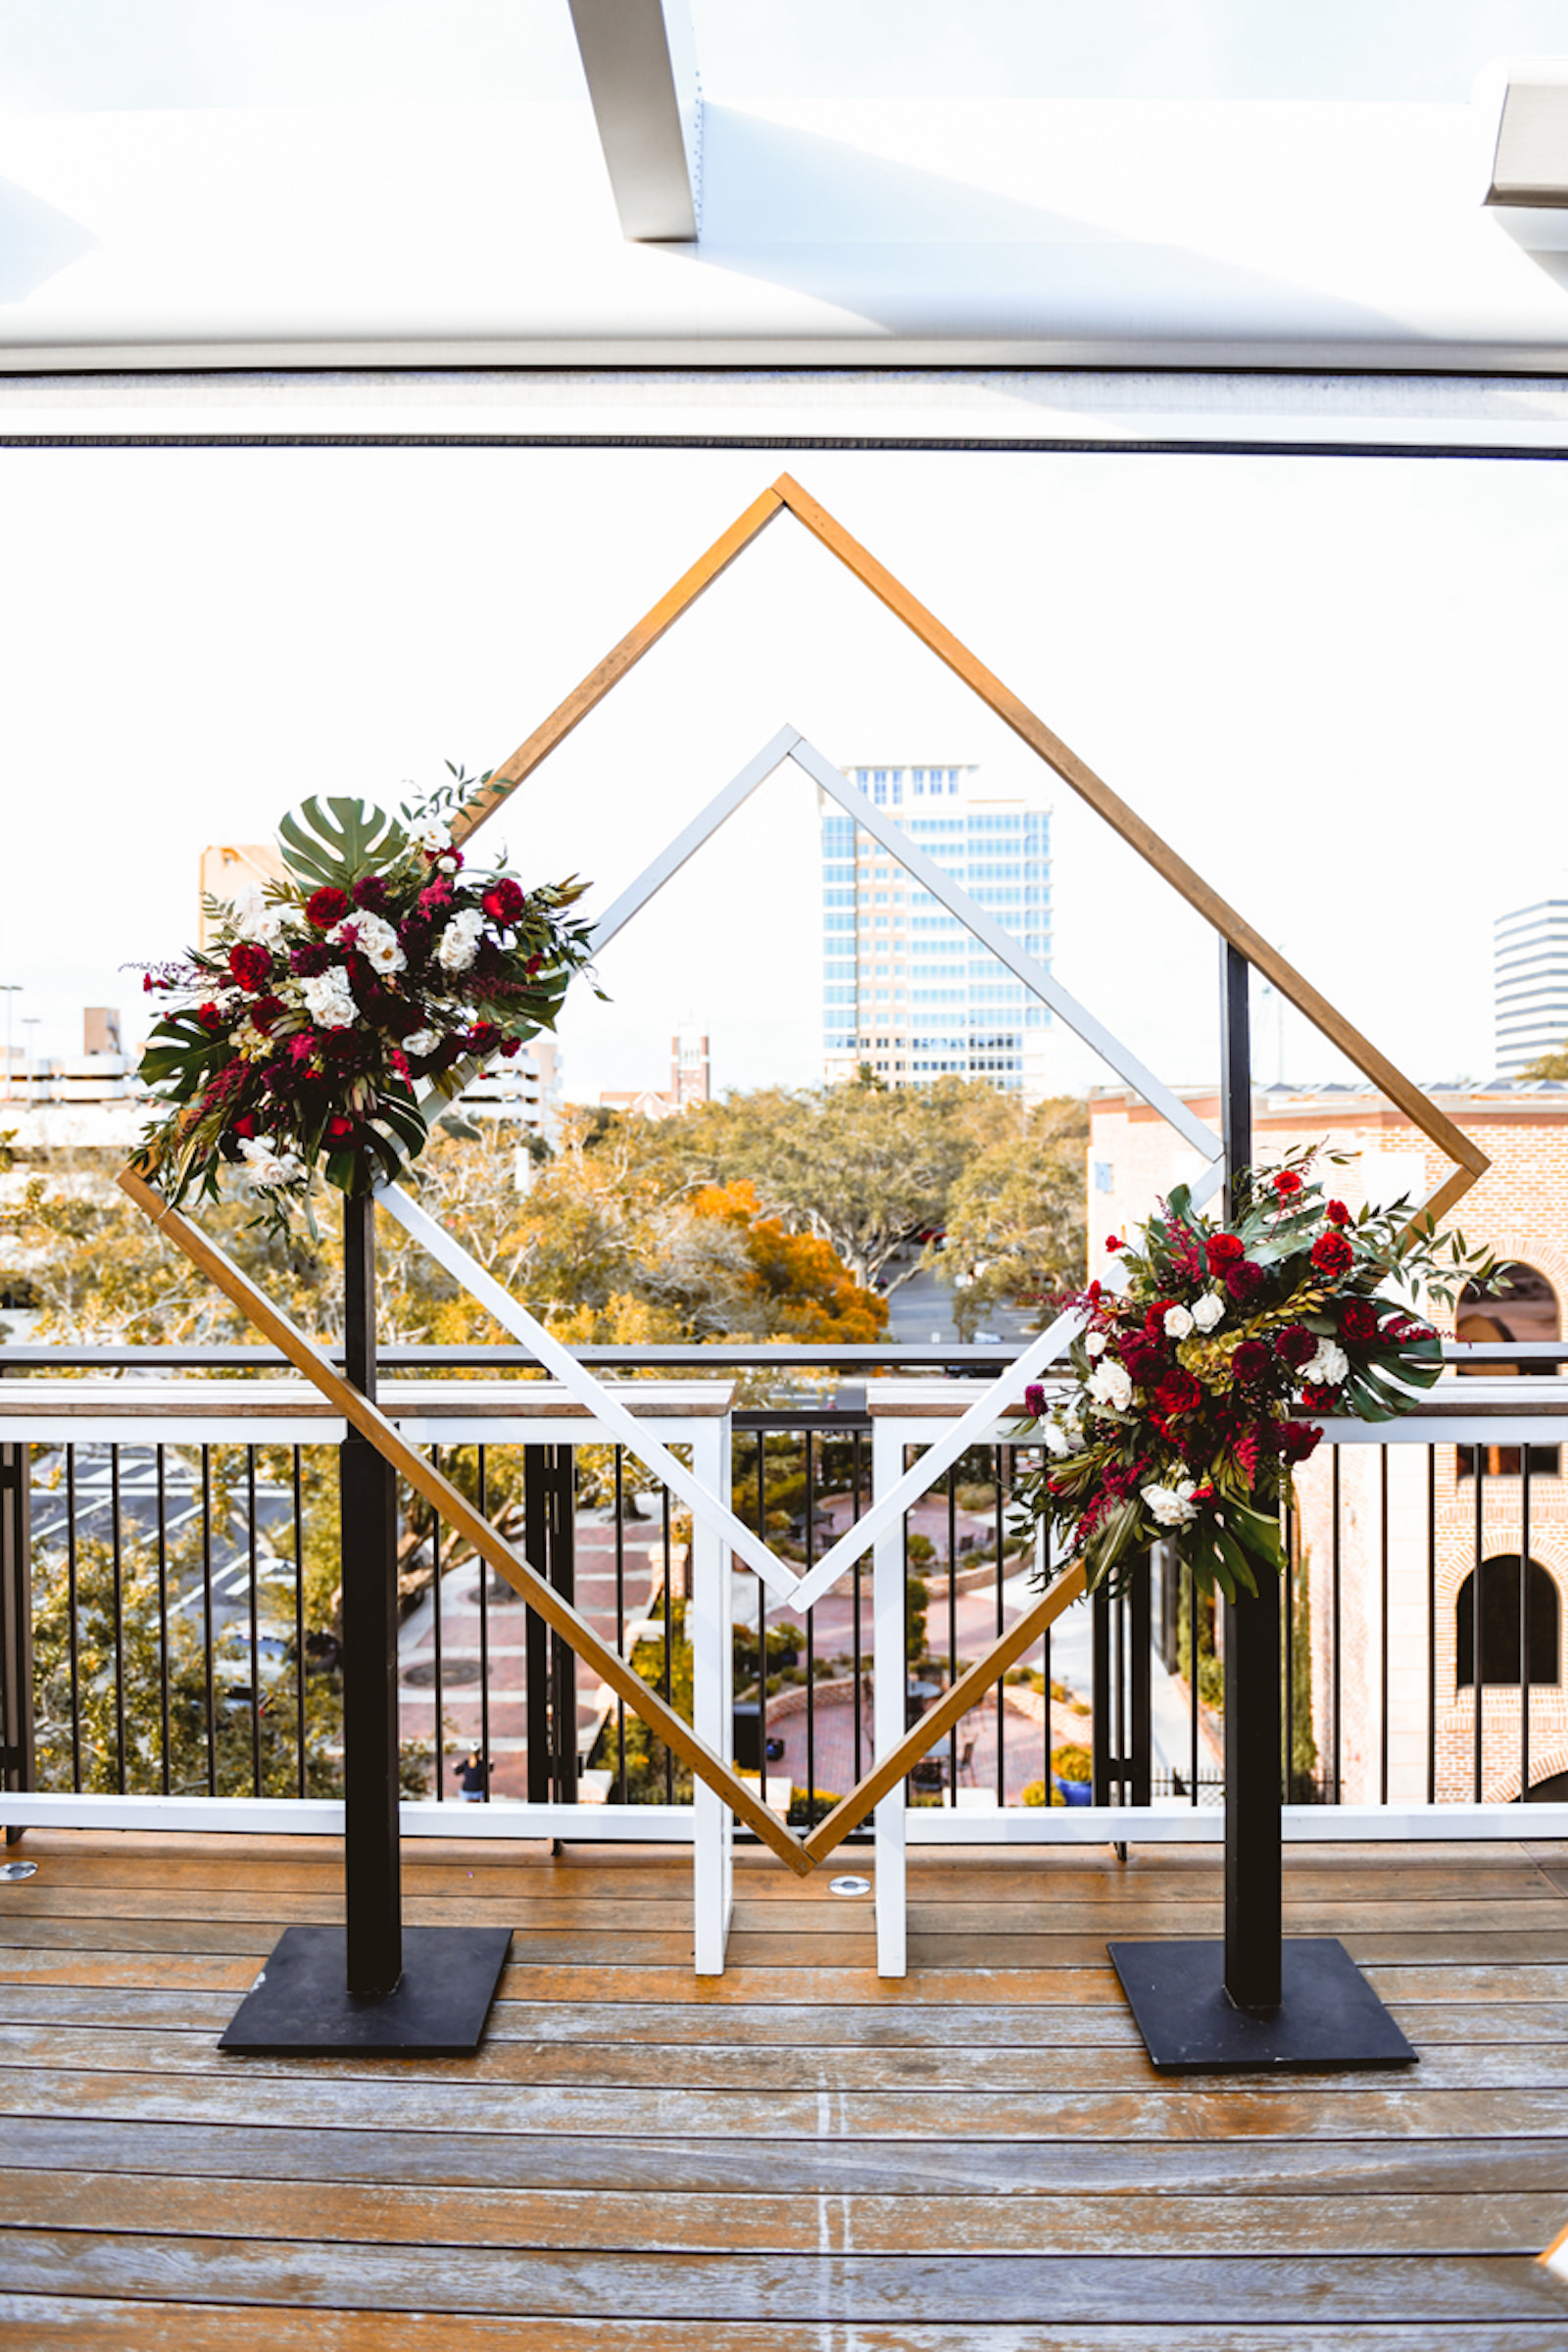 Rooftop Geometric Gold Wedding Ceremony Arch Backdrop with Red and White Flowers and Monstera Palm Leave Arrangements | St. Petersburg Florida Wedding | St. Pete Wedding Venue Red Mesa Events | Tampa Wedding Planner Special Moments Event Planning